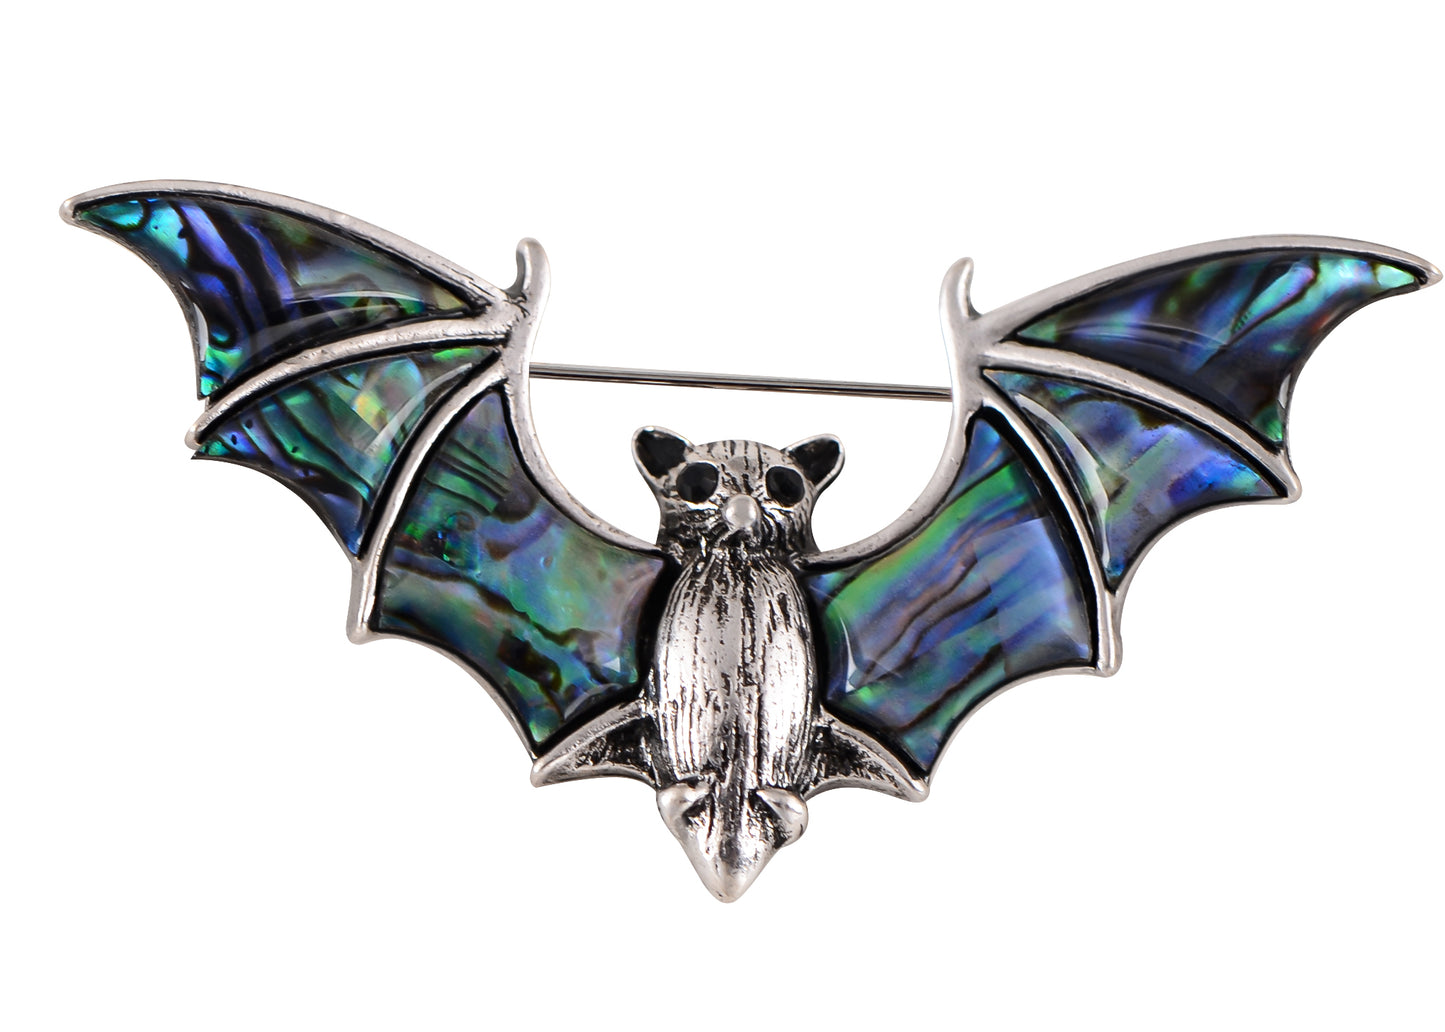 Alilang Antiqued Silver Tone Abalone Shell Vampire Bat Brooch Pin for Halloween Accessories